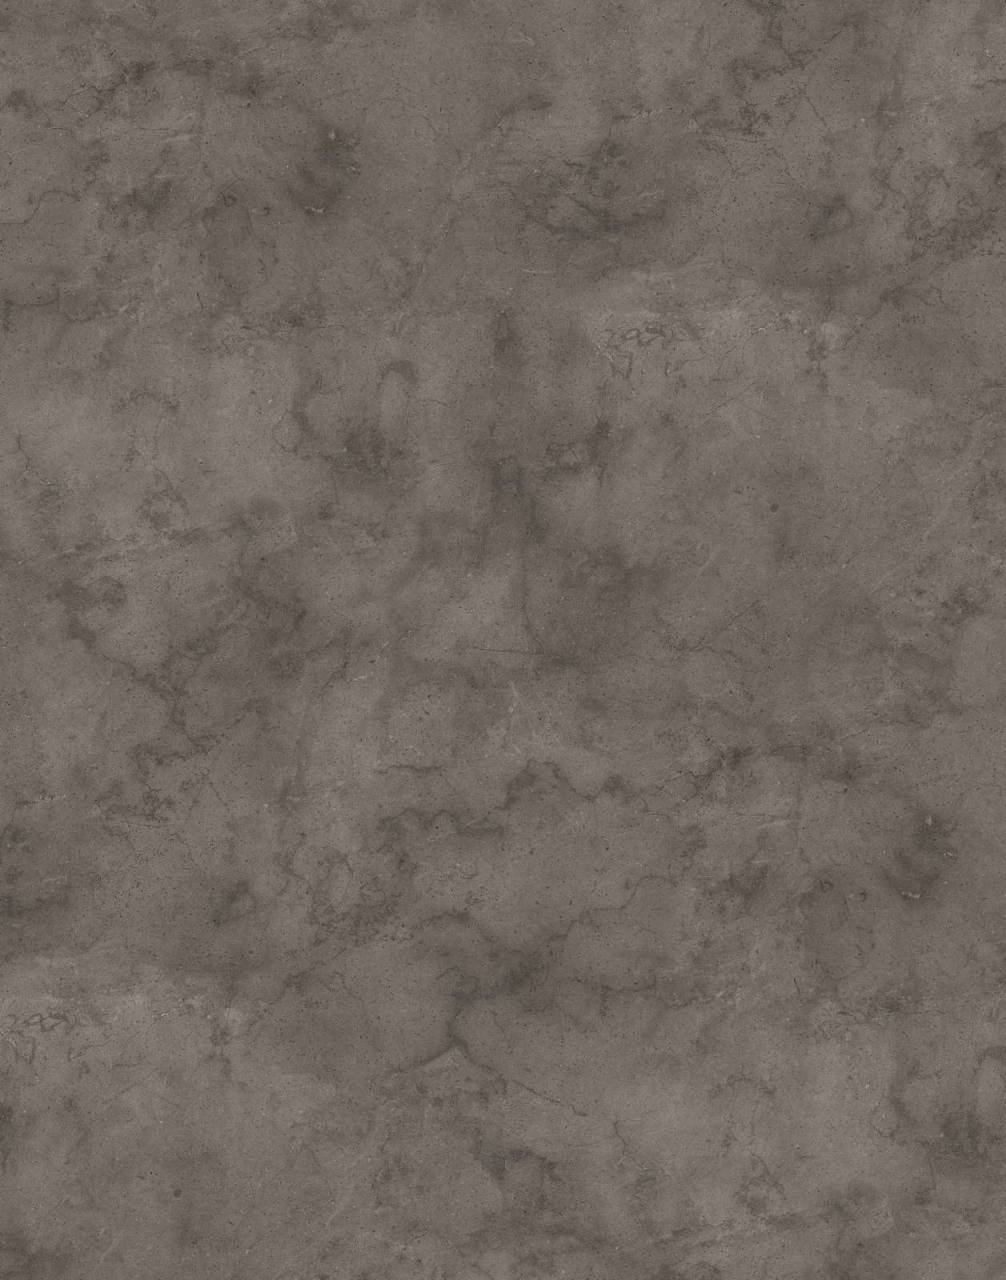 This is a Fossil Arosa PN laminate worktop sample, K539, with a grey, fossil-like design.